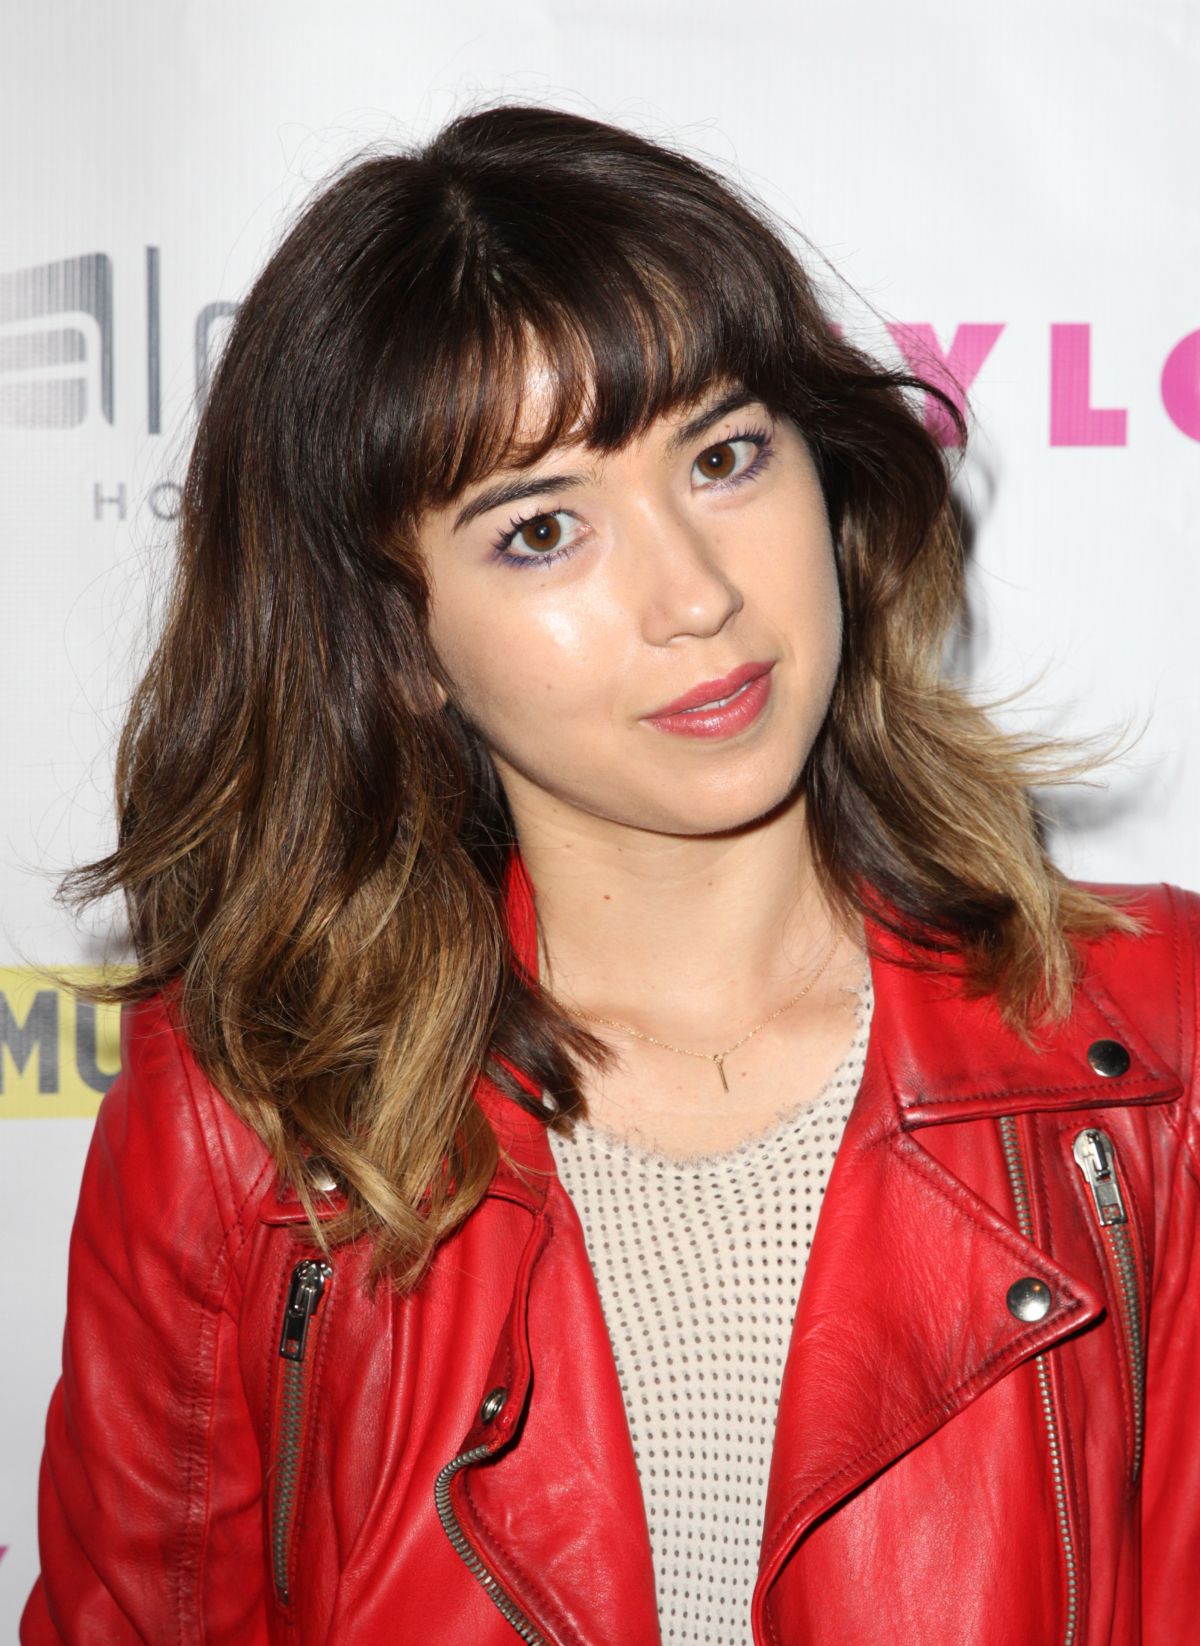 nichole-bloom-at-nylon-magazine-music-issue-party-in-los-angeles_2.jpg